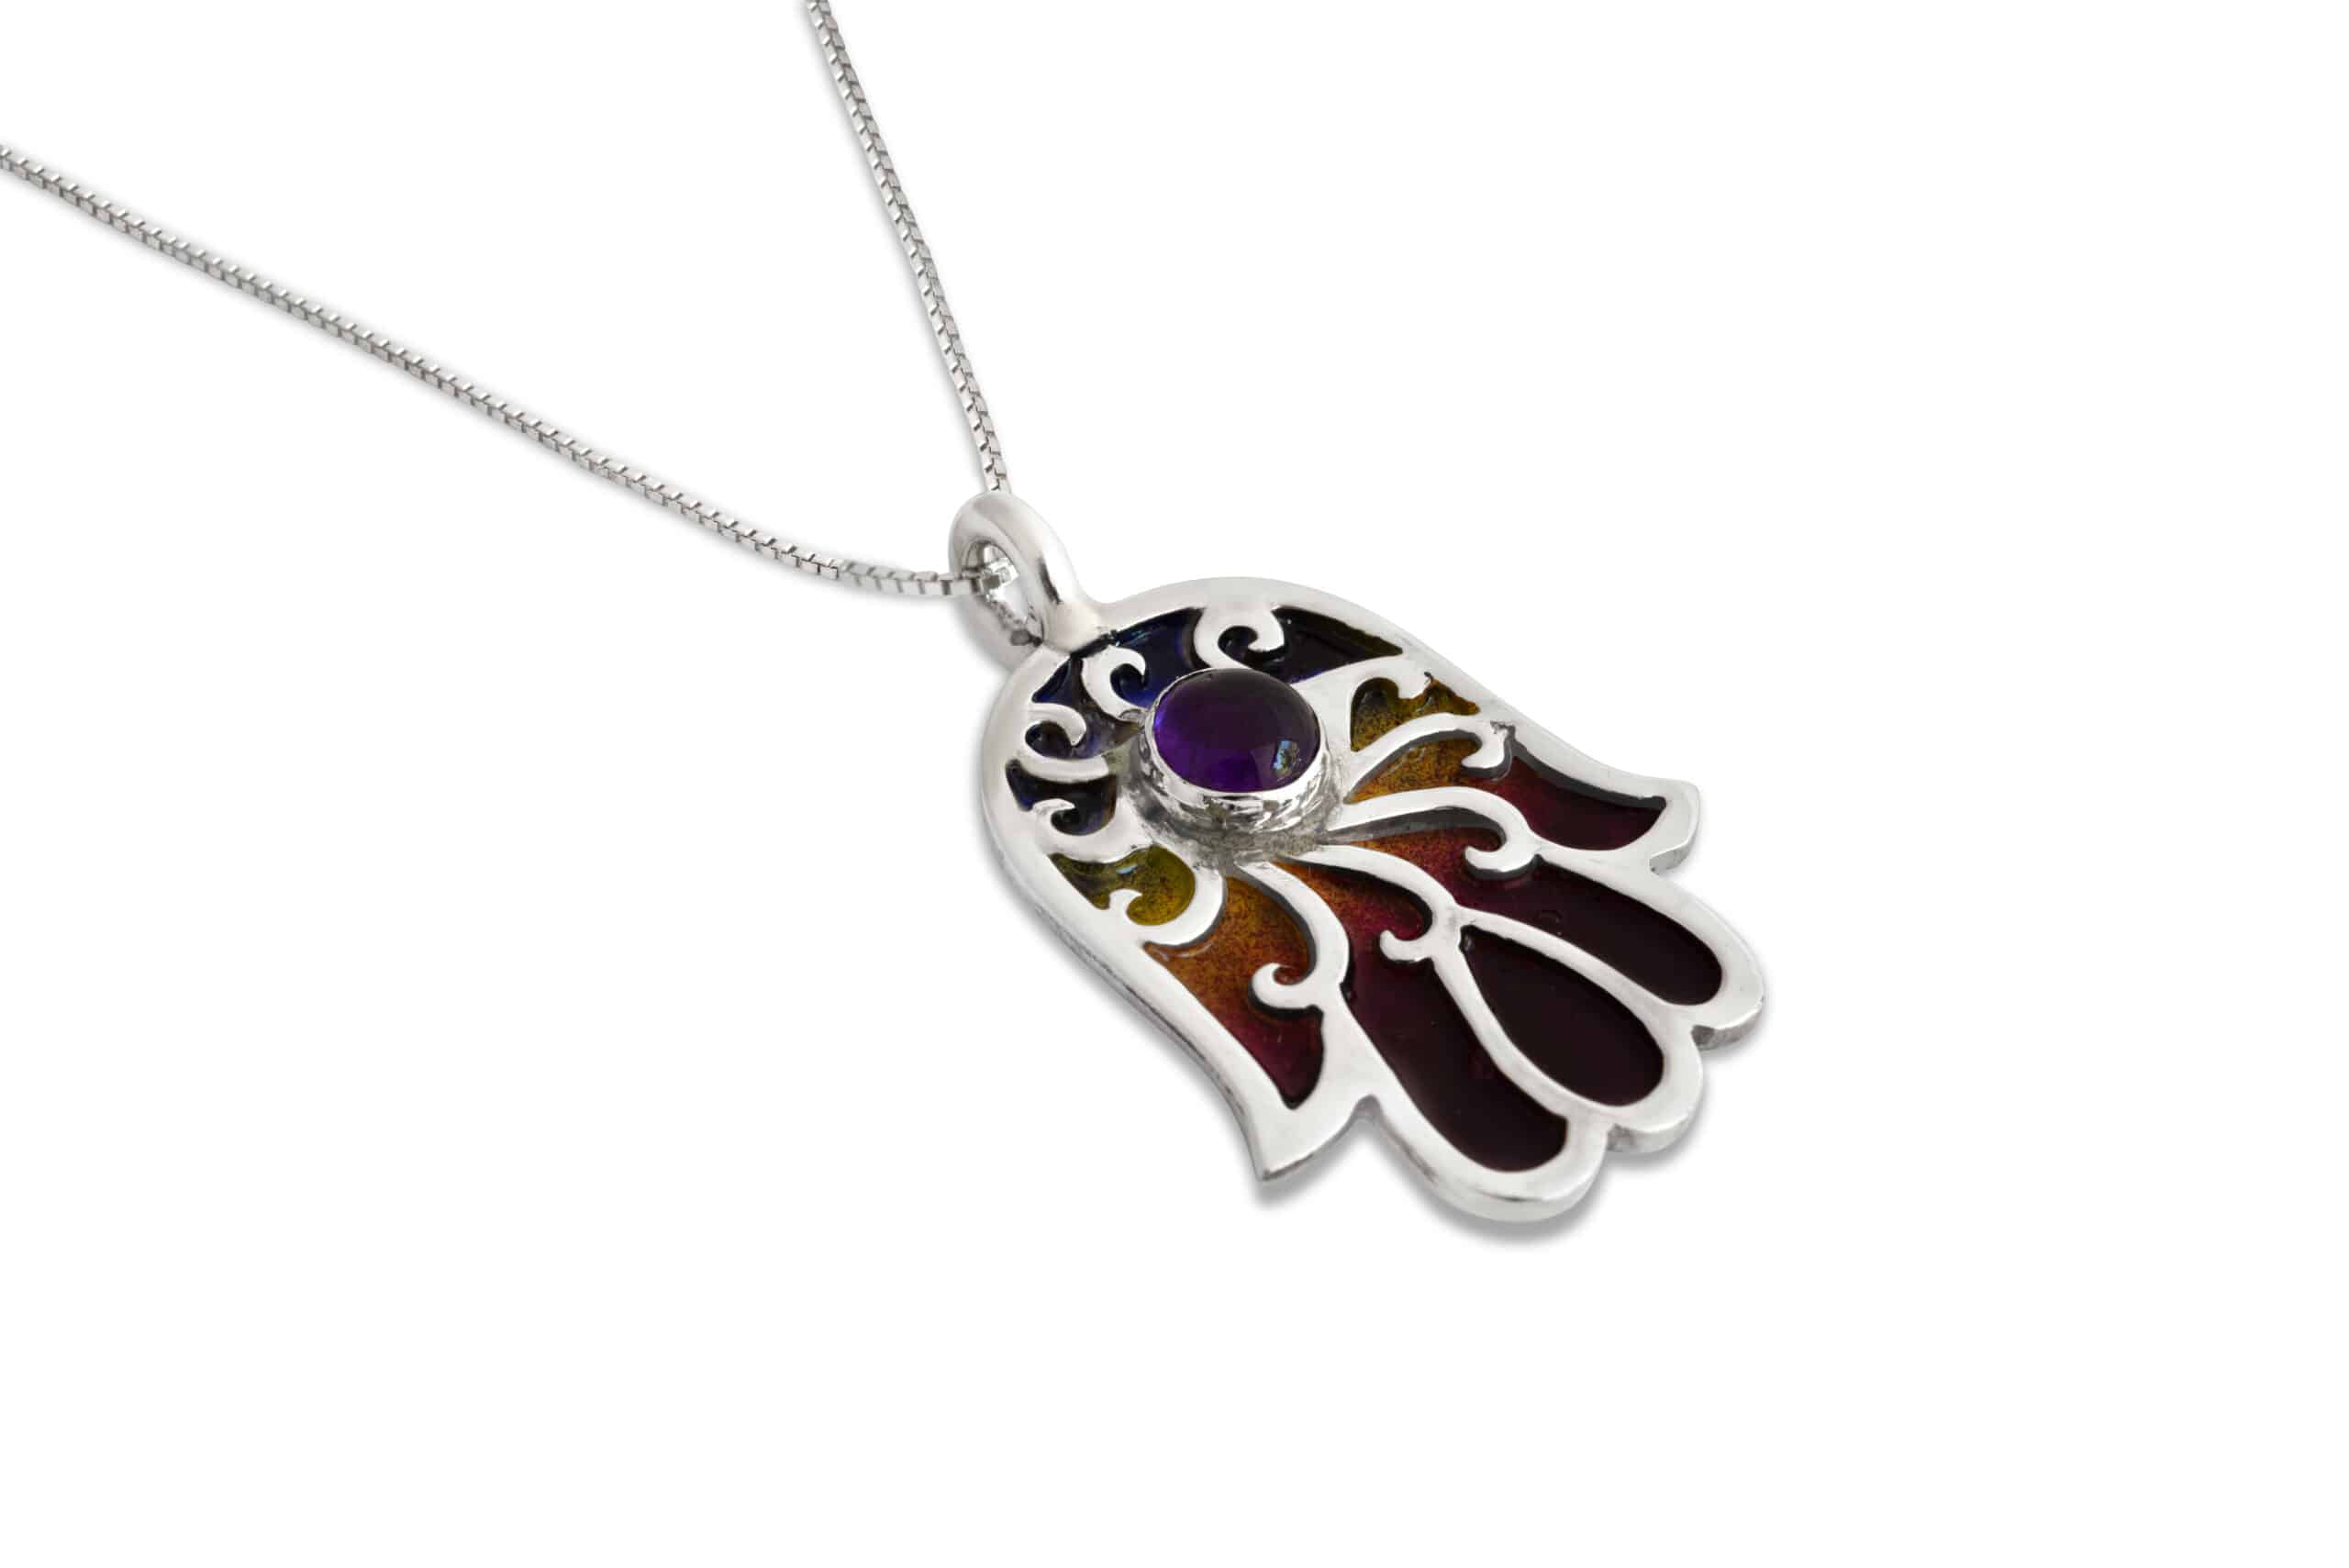 Enameled Silver Hamsa Necklace with Amethyst Stone